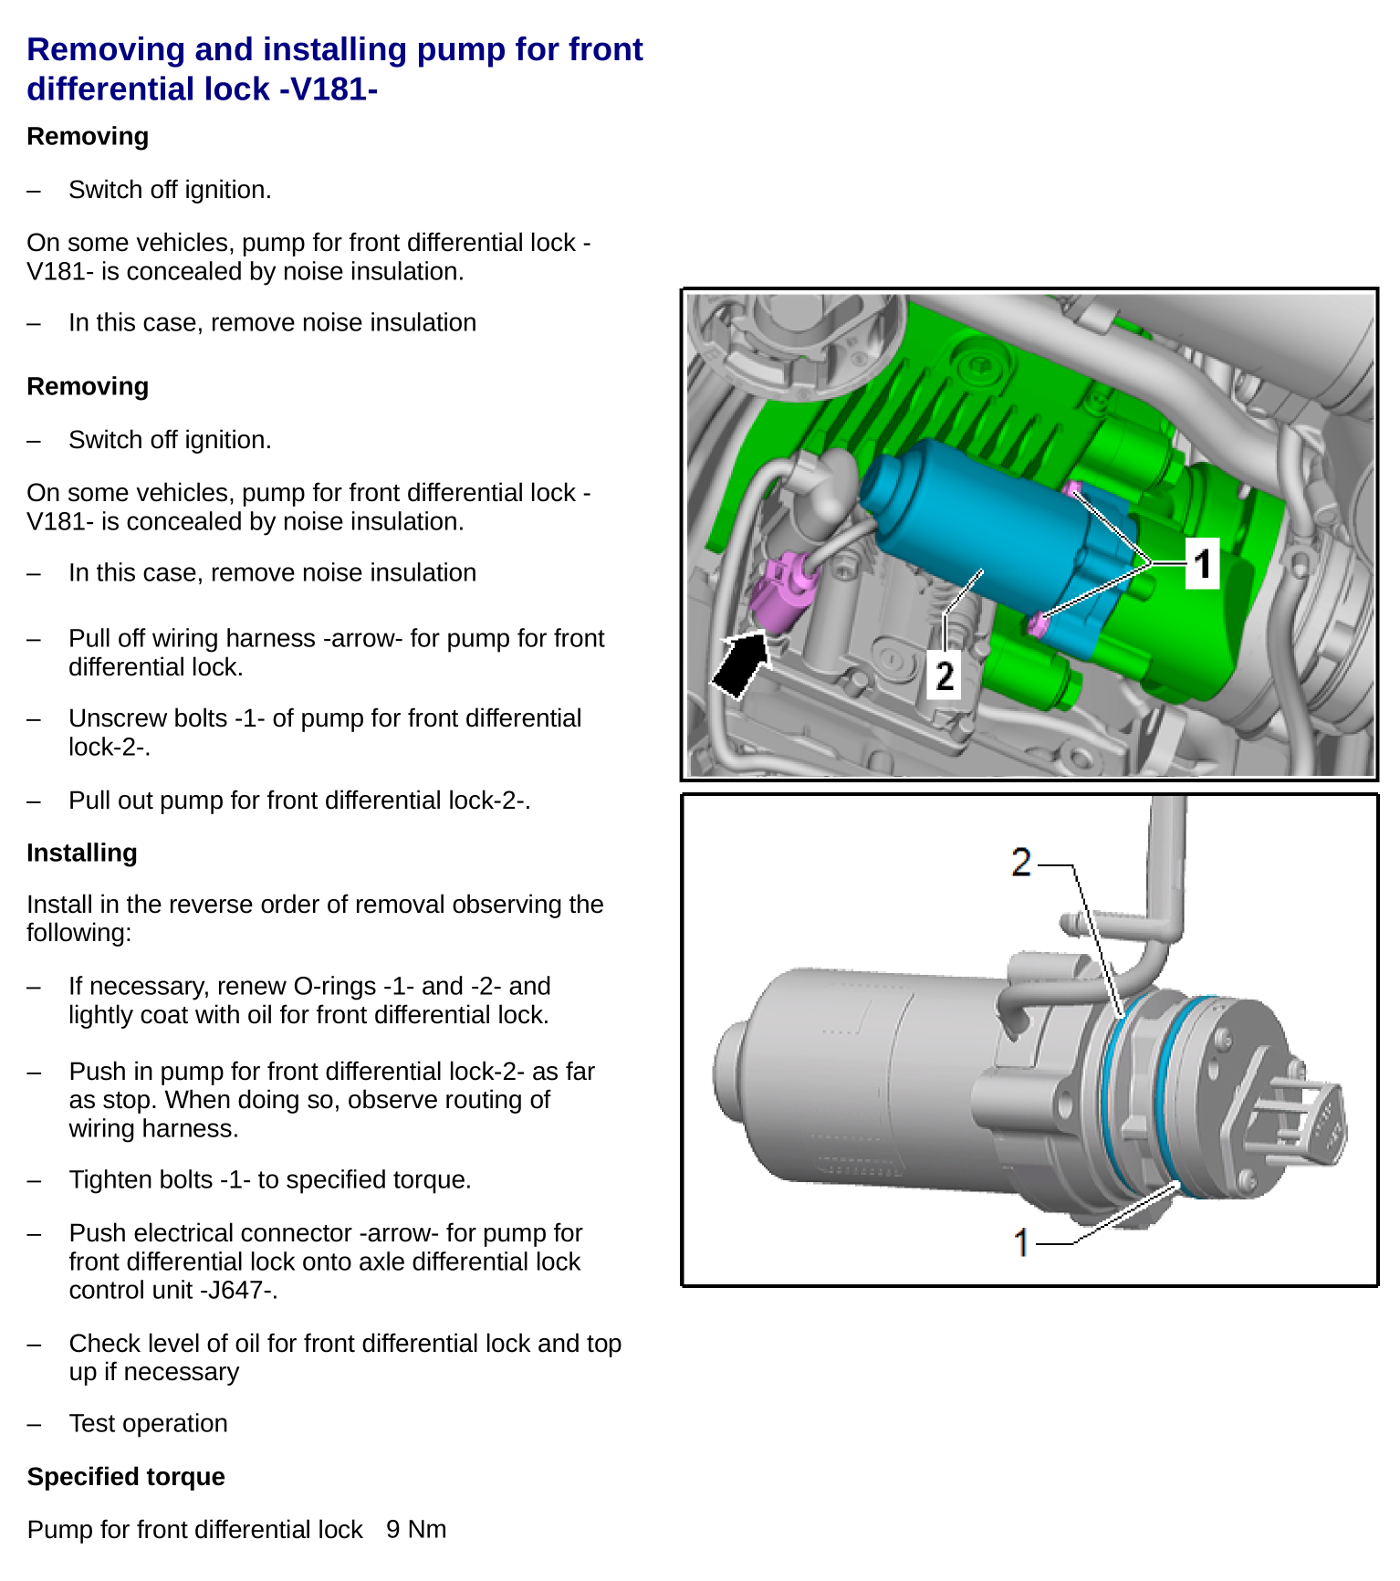 Diagram and written instructions for removing and installing the pump for front differential lock V181 VAQ Ediff system